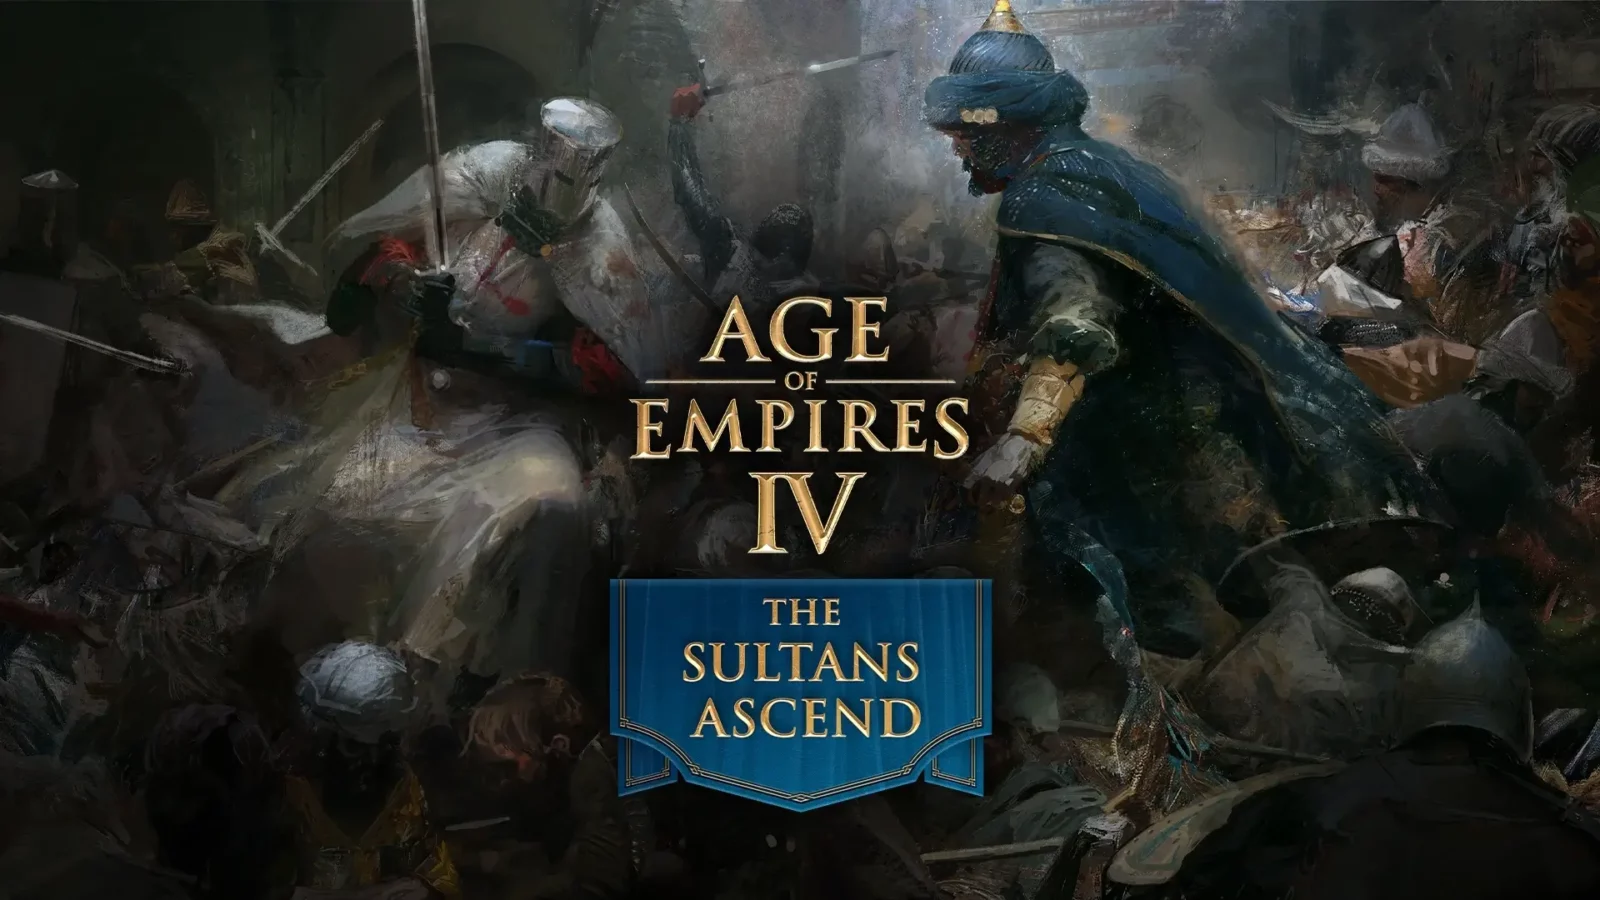 Age of Empires IV The Sultans Ascend